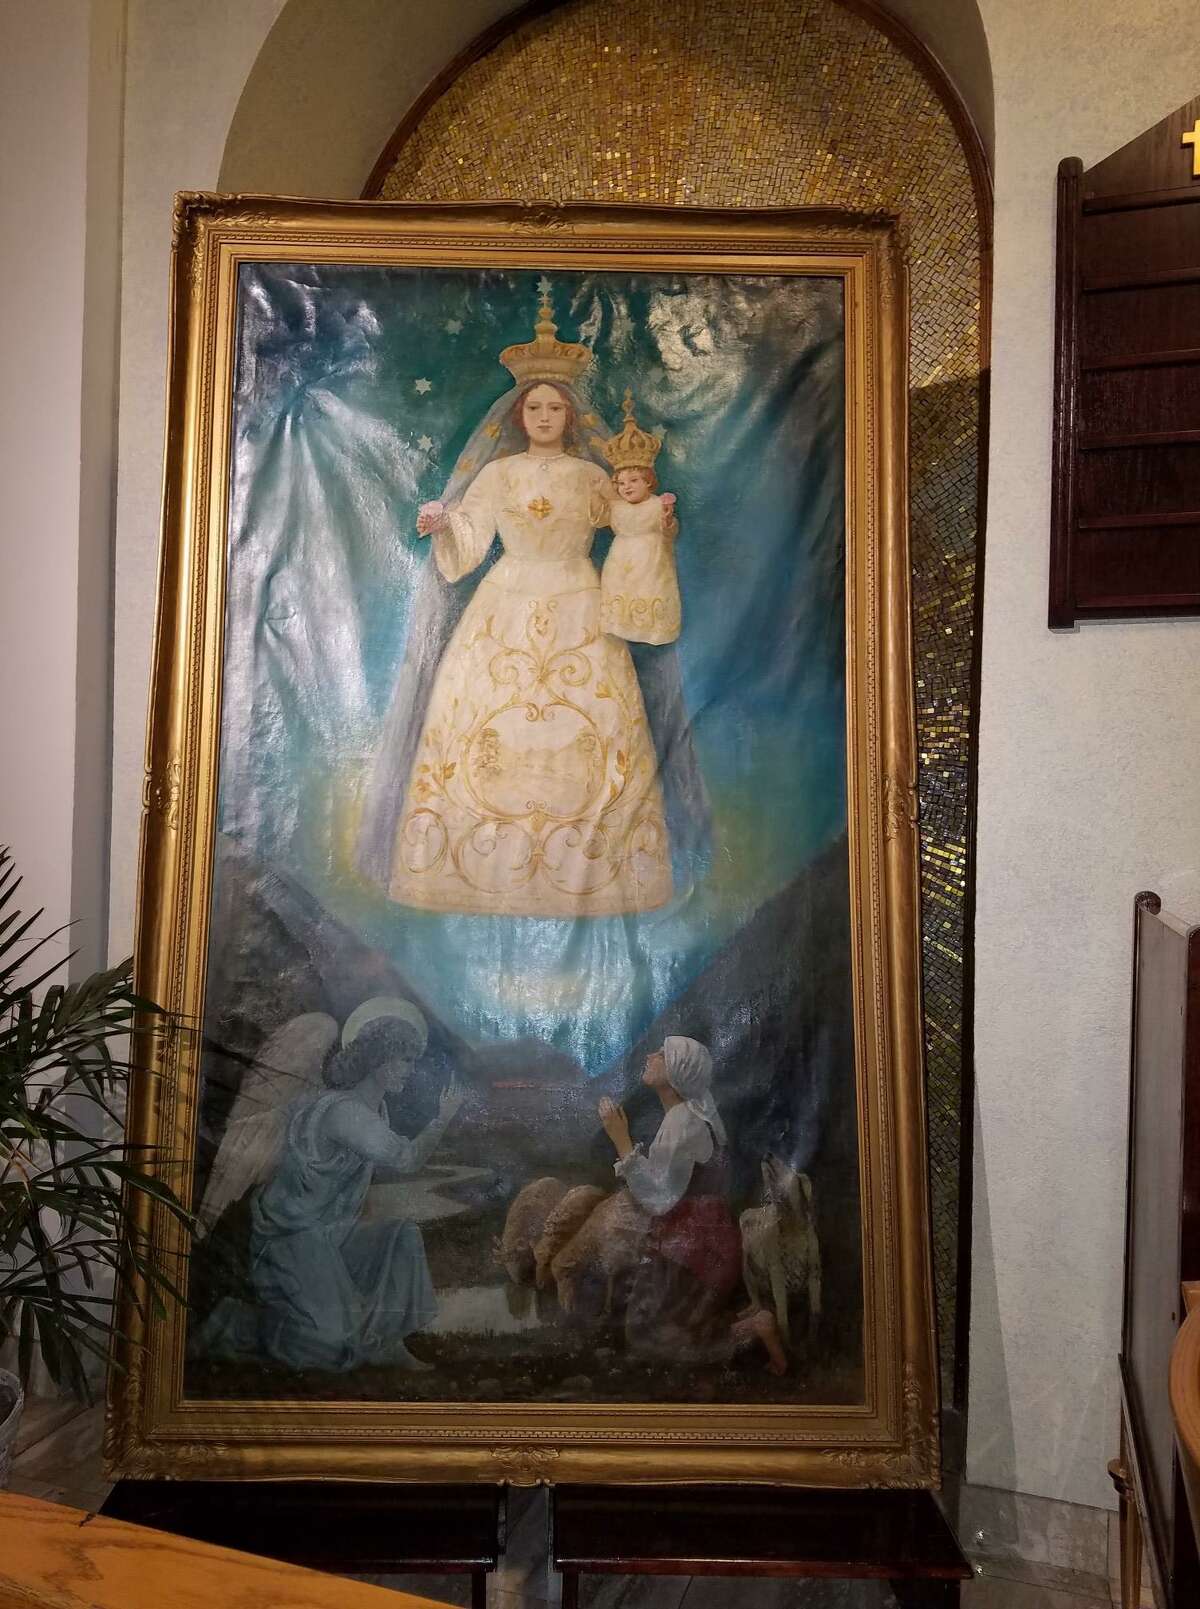 La Madonna di Canneto, a painting owned by a Stamford-Italian social club, has gone missing.